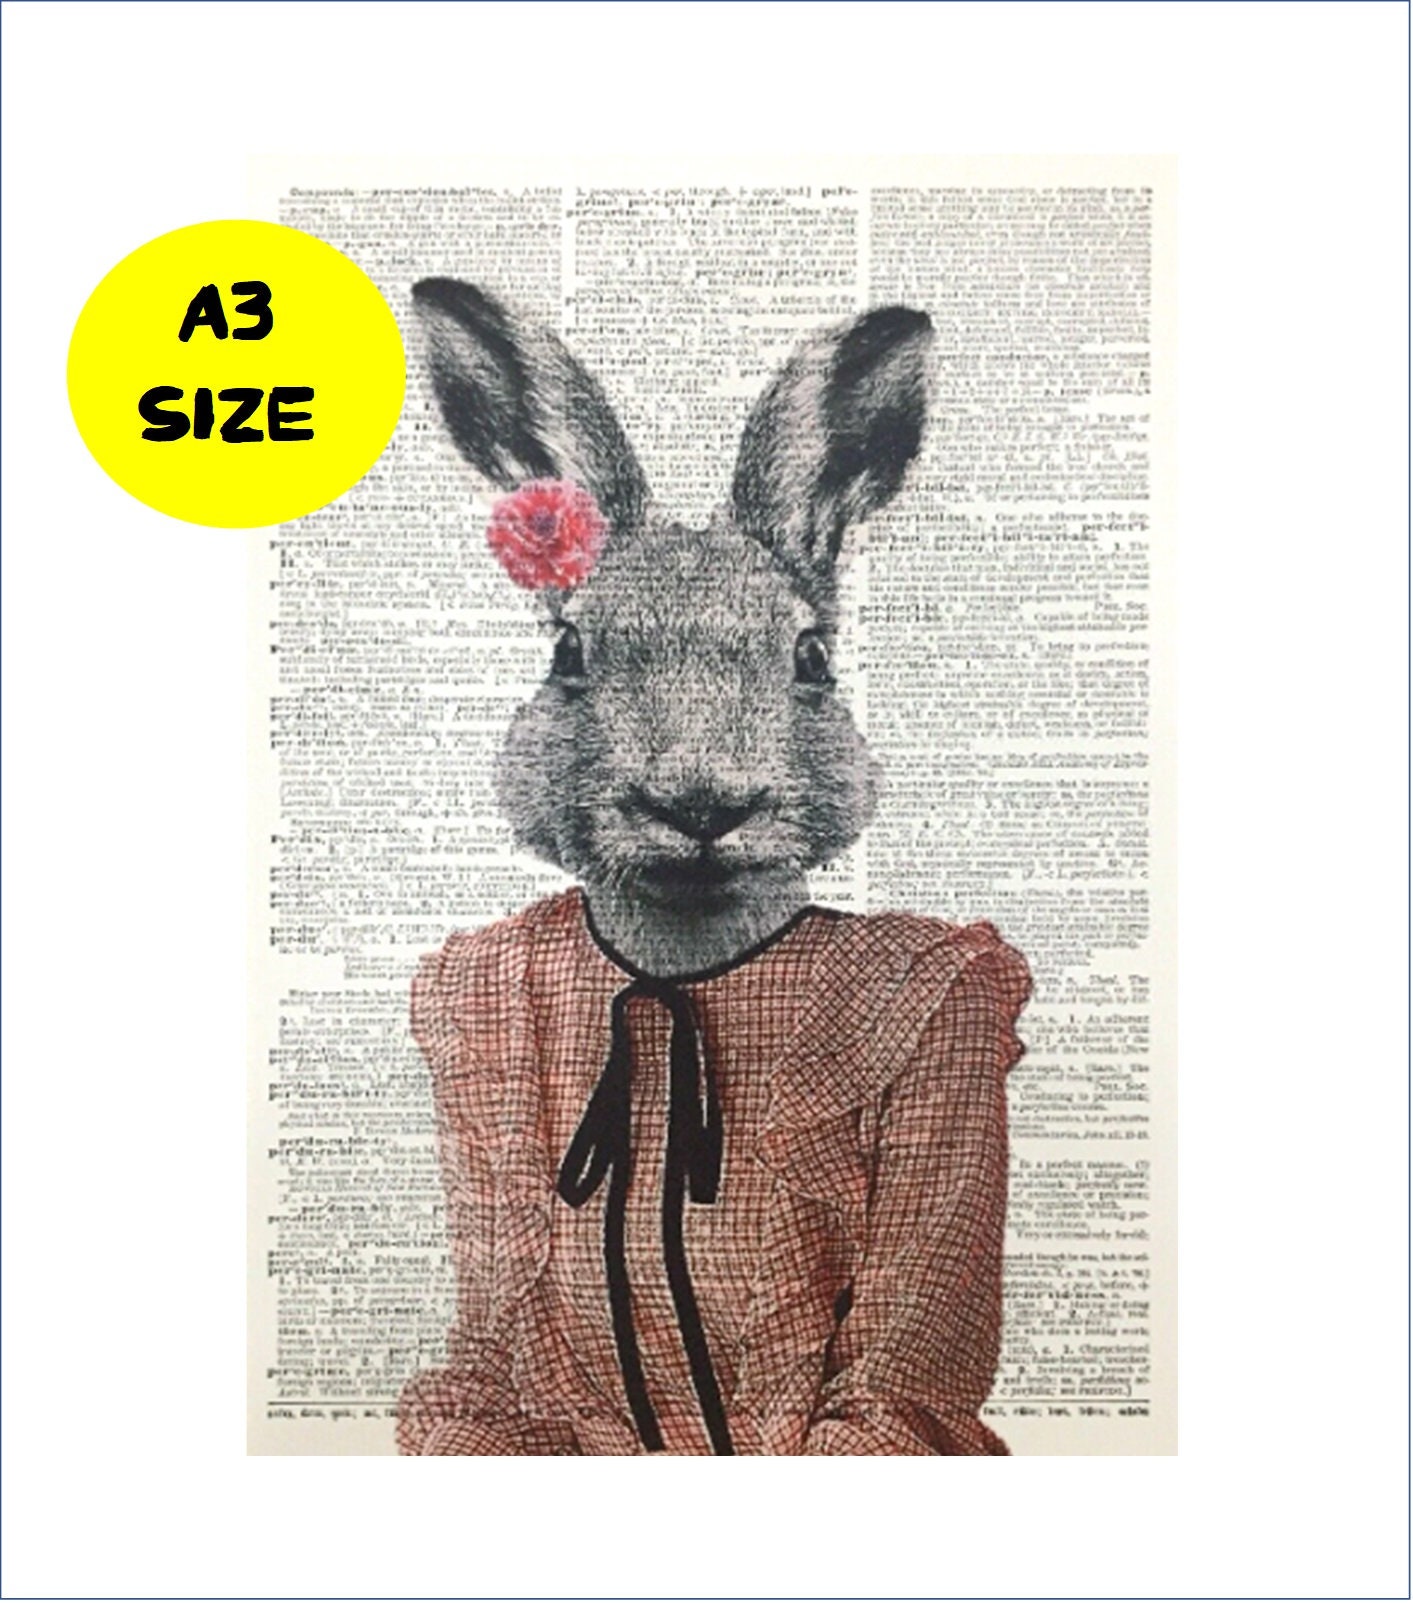 Hare Rabbit Print Vintage Dictionary Page Wall Art Picture Animal In Clothes 